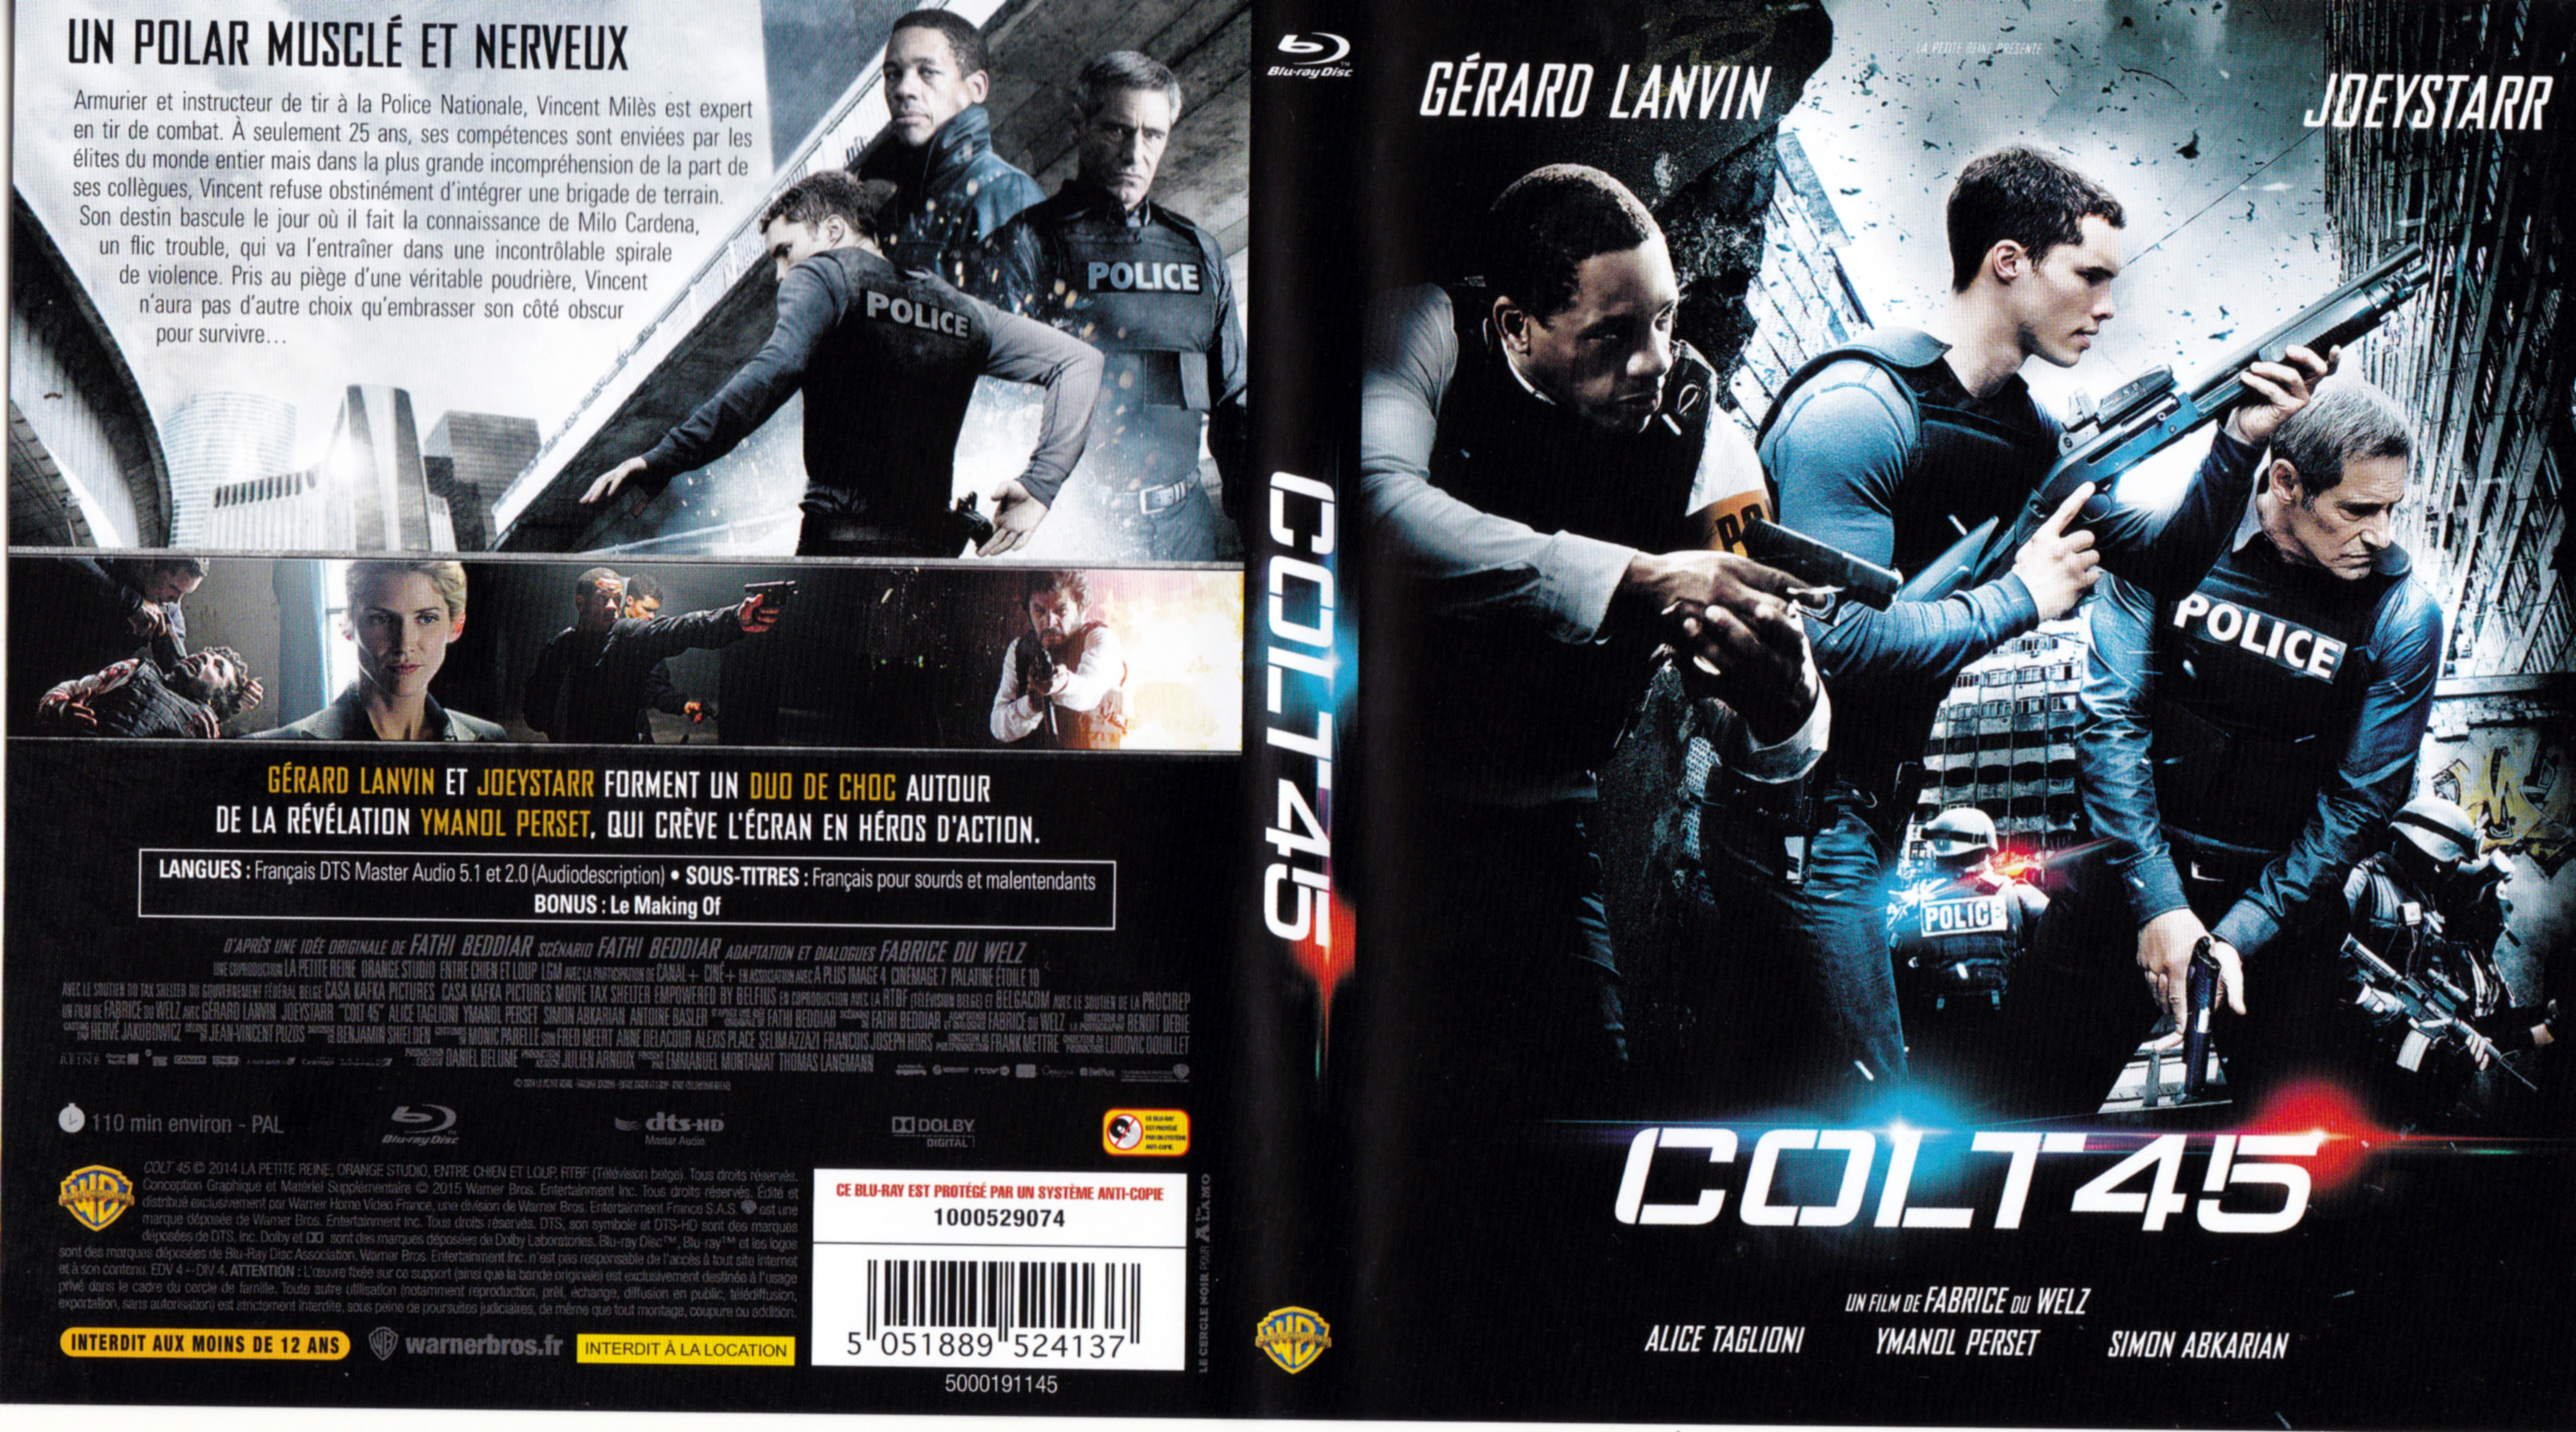 Jaquette DVD Colt 45 (BLU-RAY)